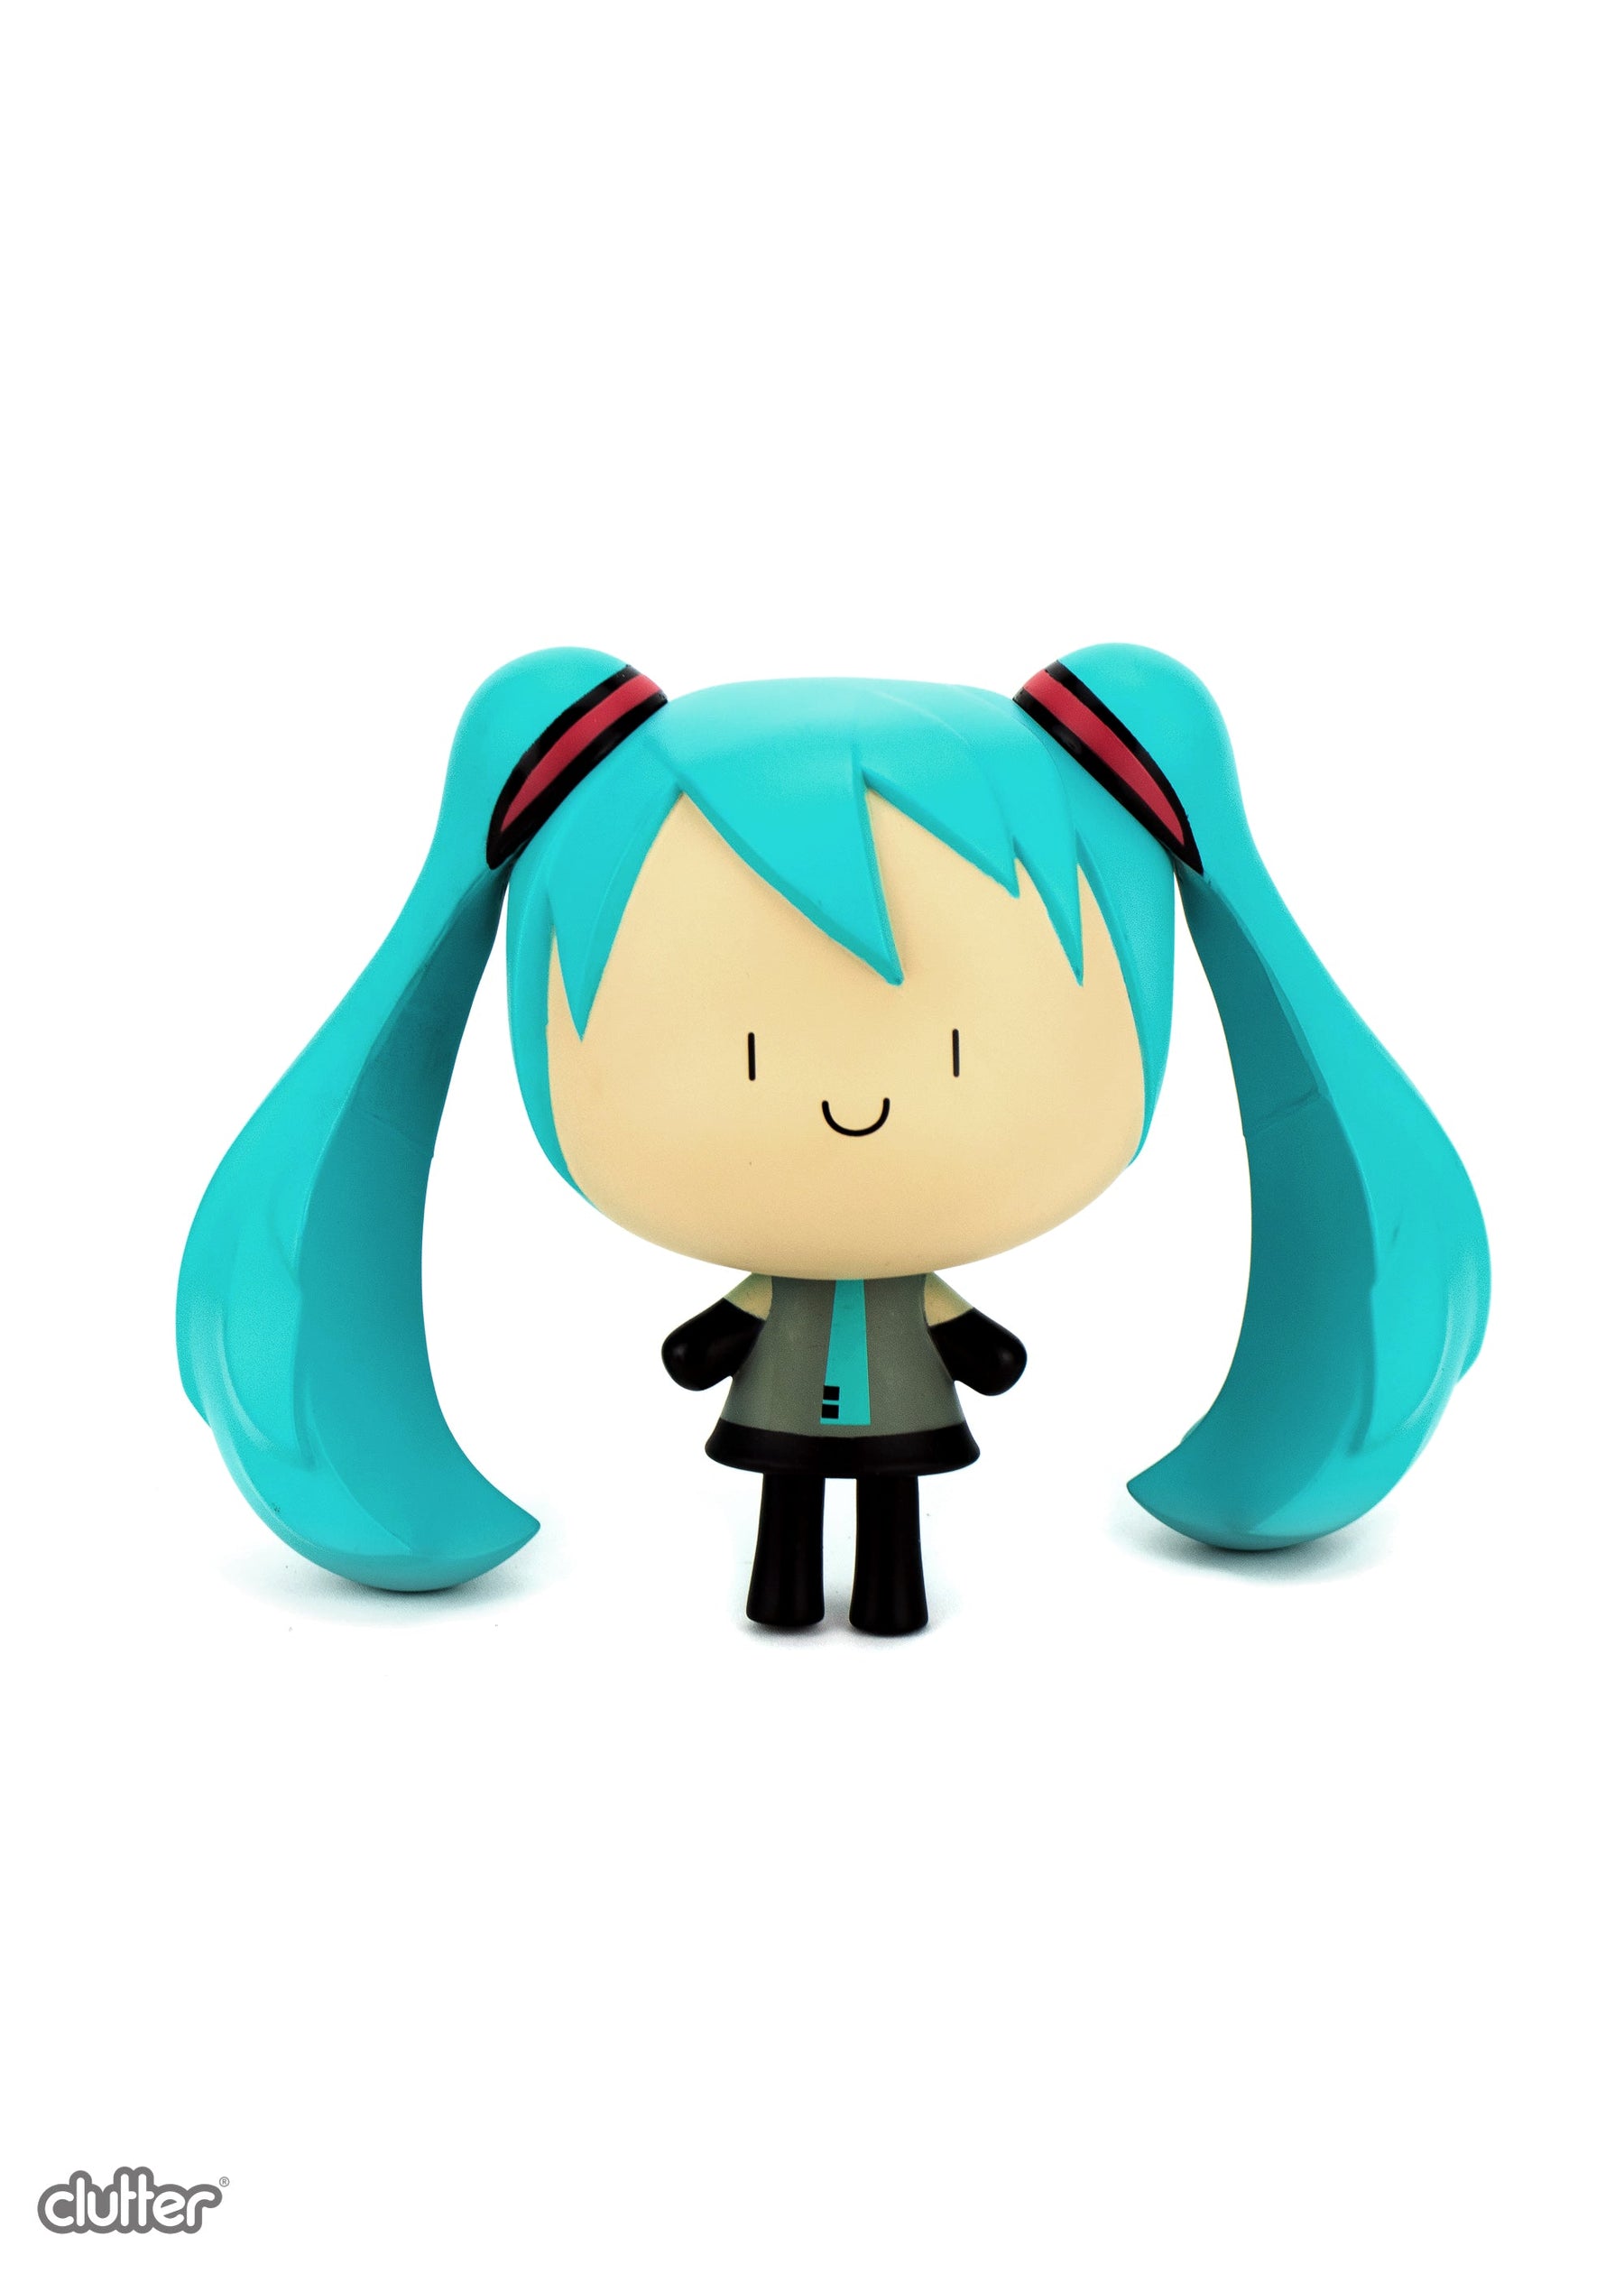 U-Miku 5.5-inch vinyl figure by Clutter Studios Available Now ! ! !